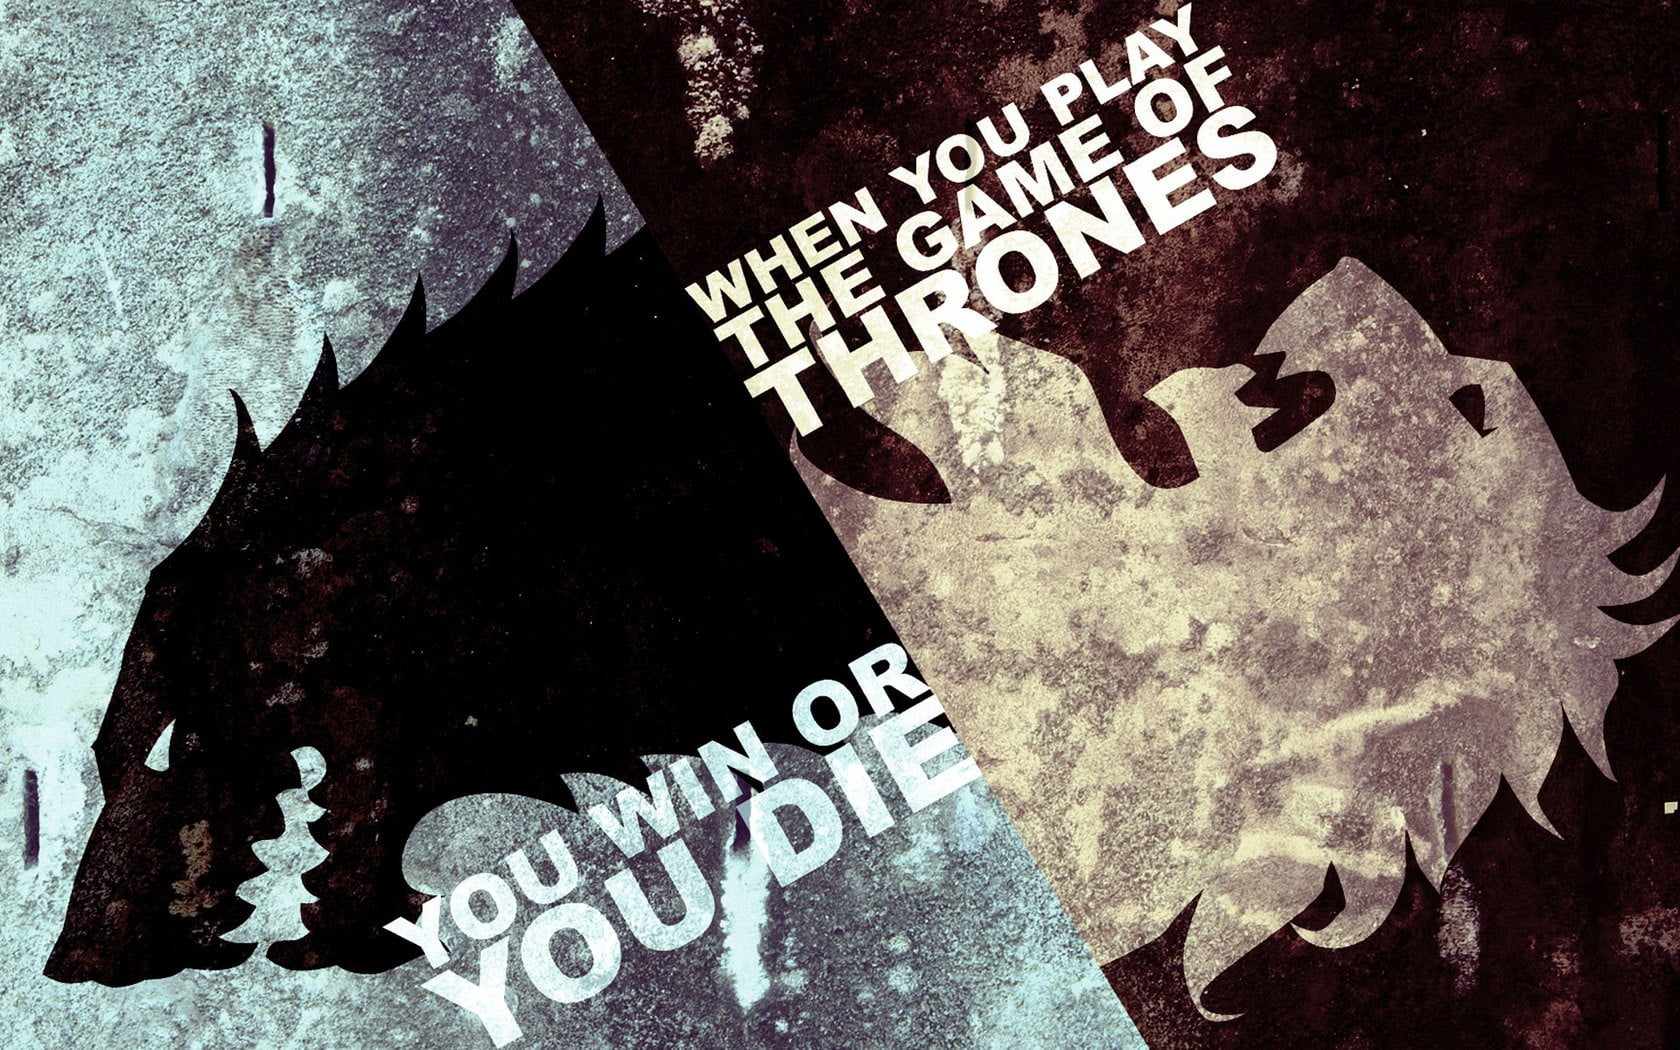 The game of Thrones digital wallpaper